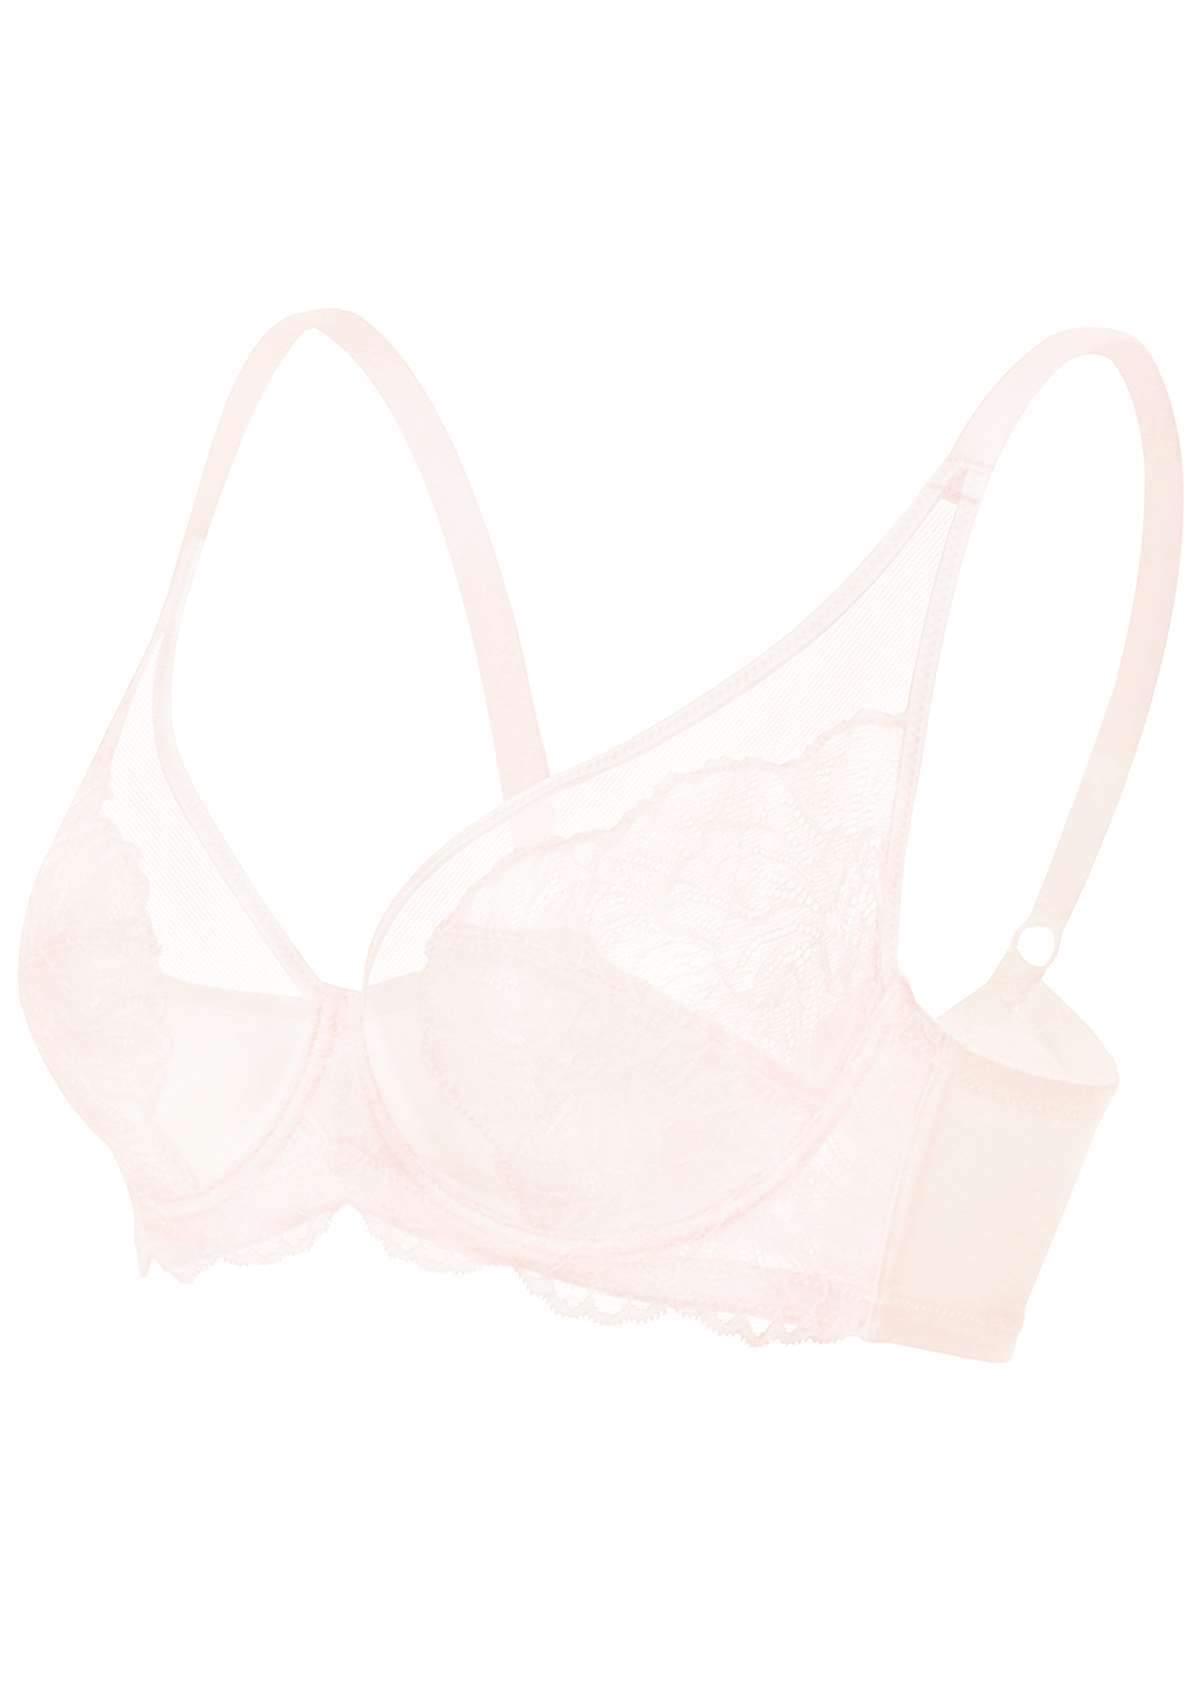 HSIA Blossom Sheer Lace Bra: Comfortable Underwire Bra For Big Busts - White / 42 / G